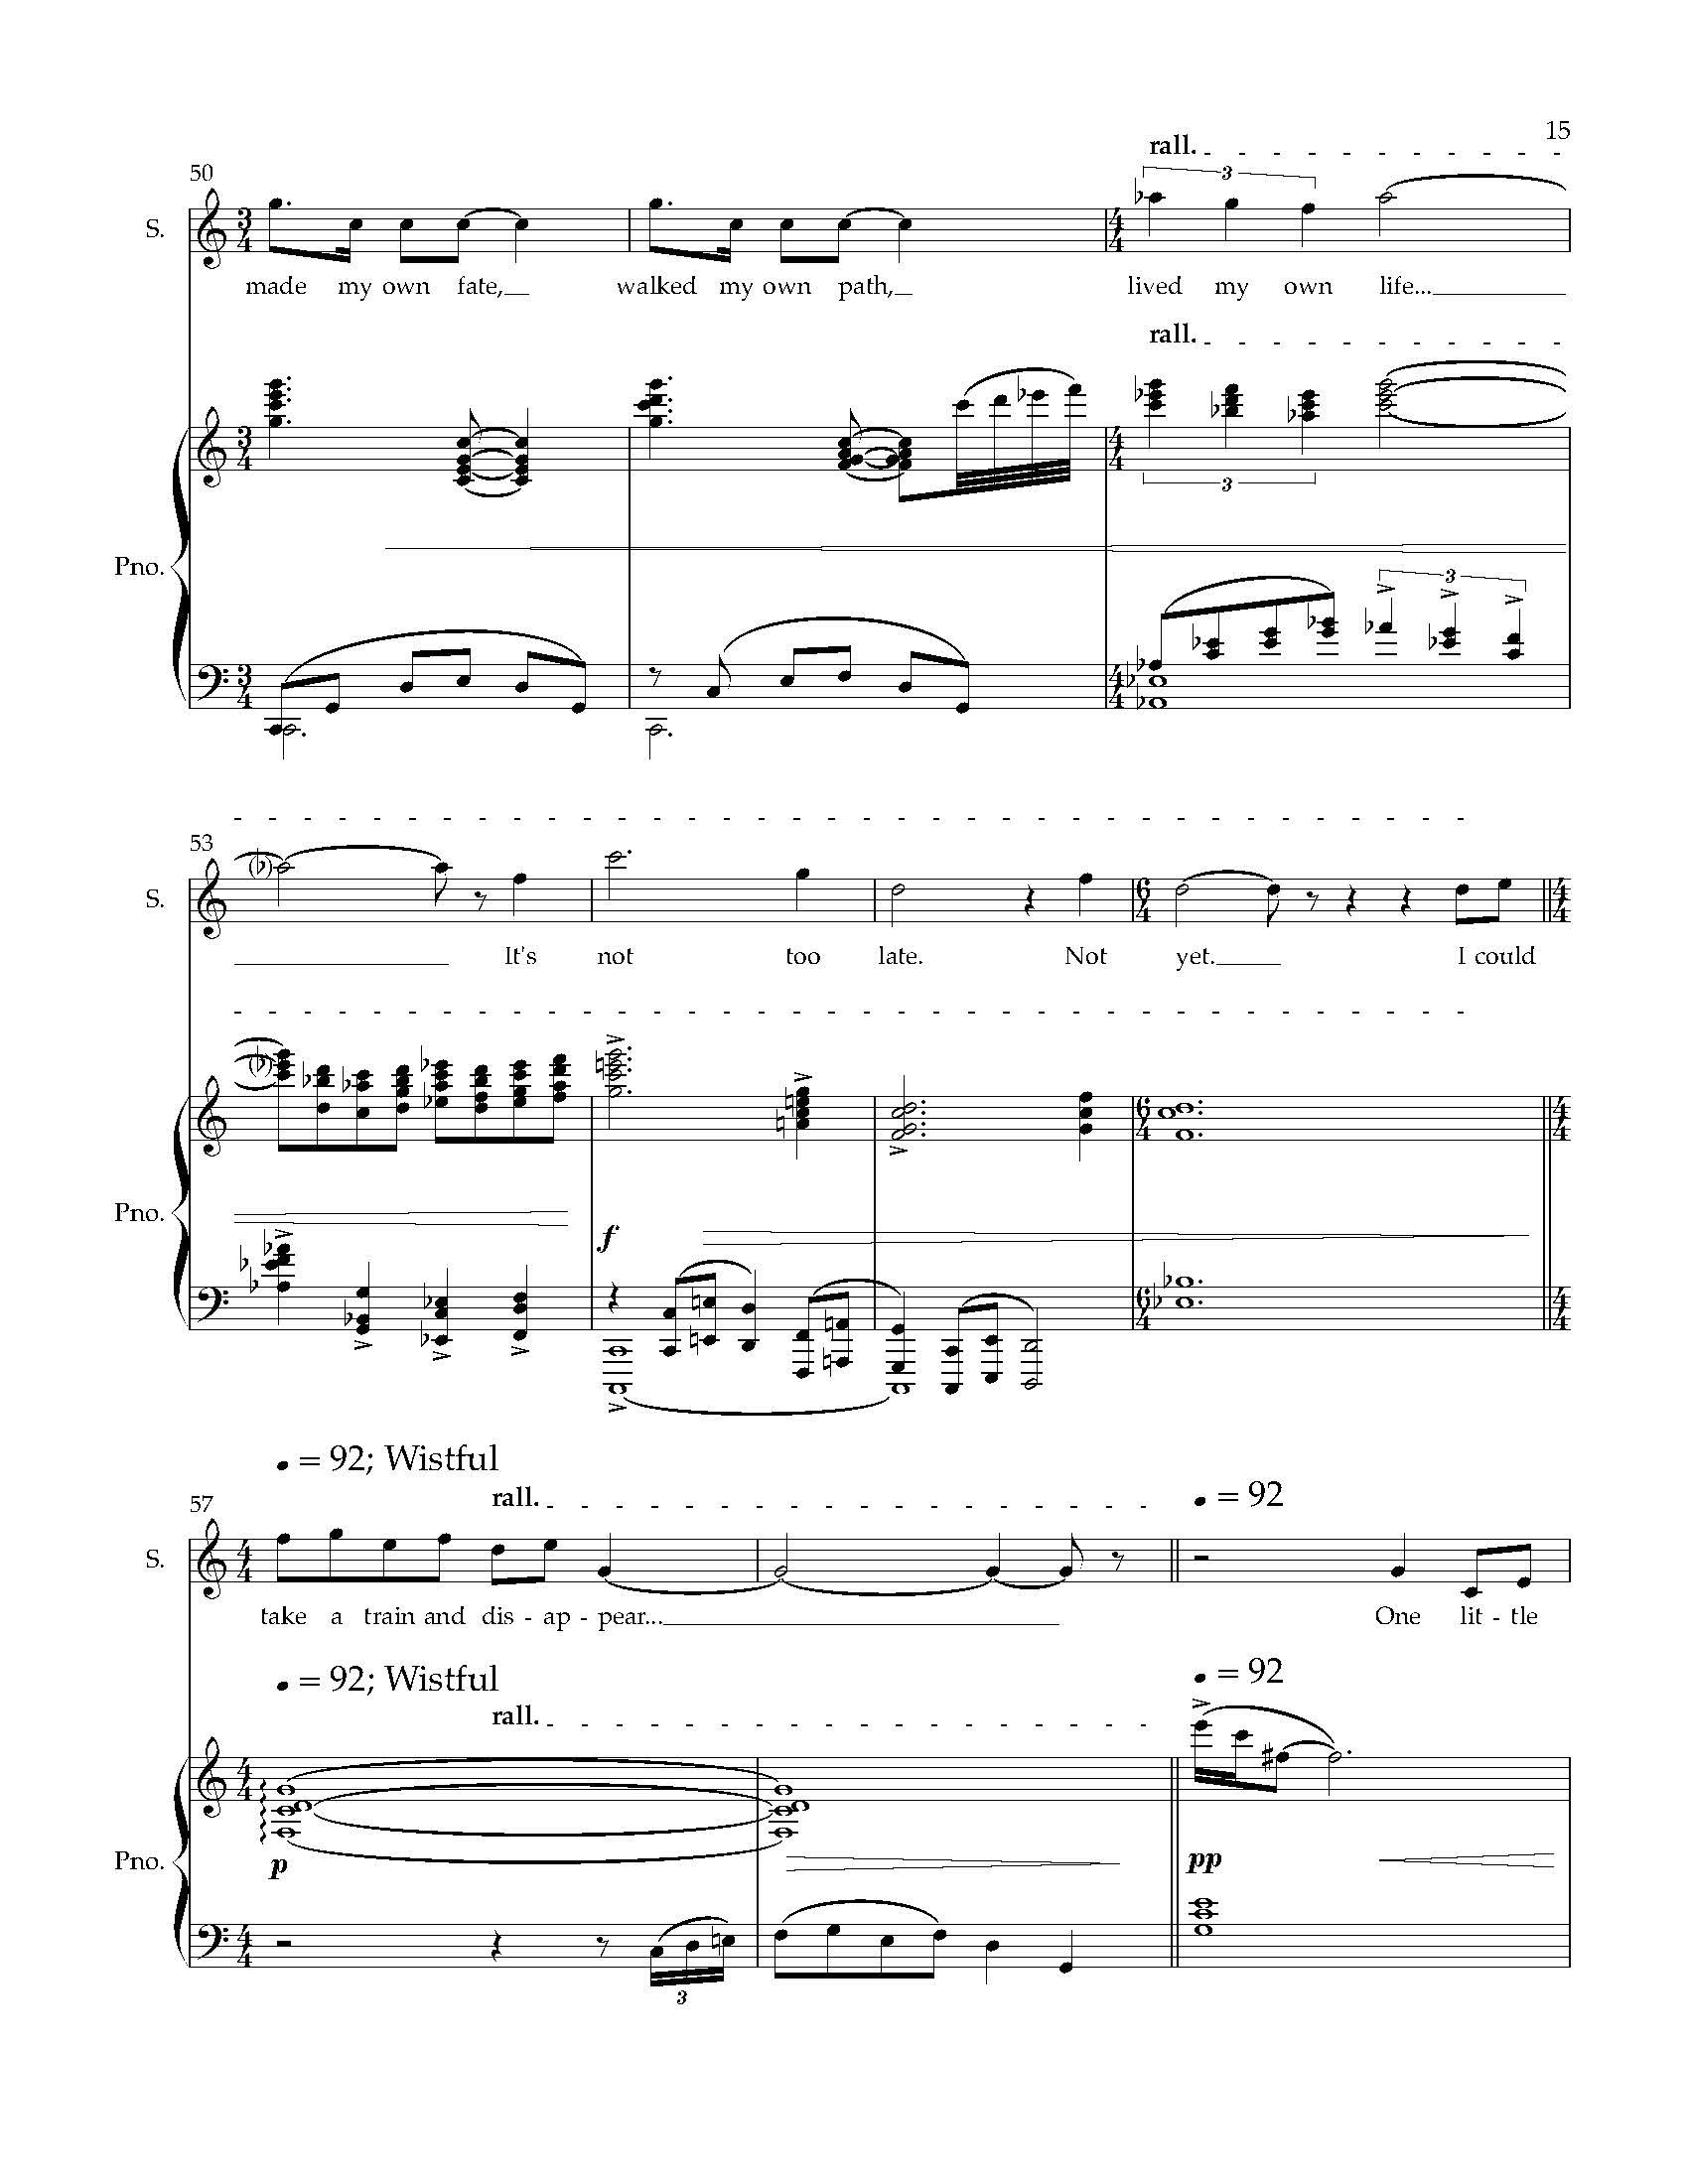 Five Arias from HWGS - Complete Score (1)_Page_19.jpg